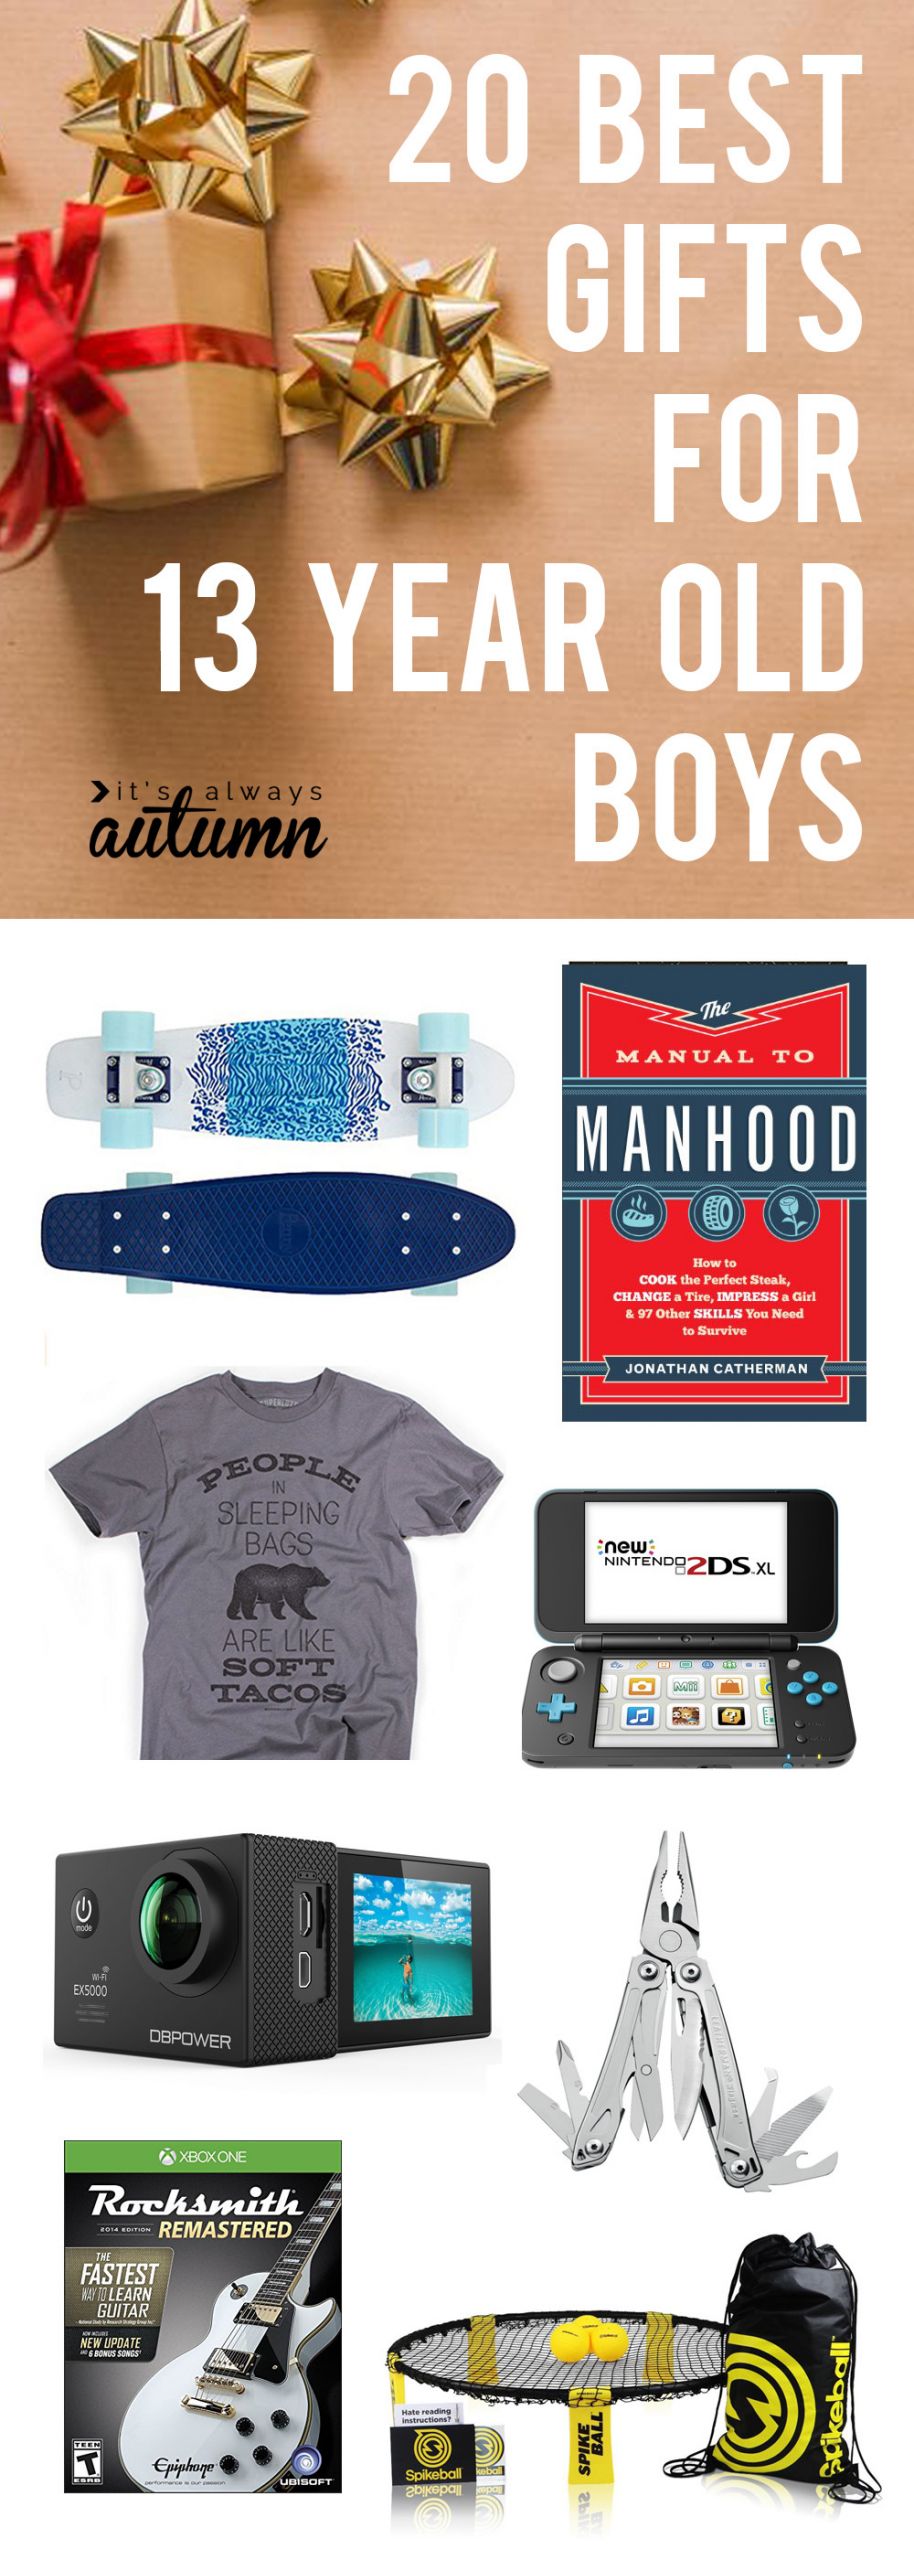 Birthday Gift Ideas For 13 Year Old Boy
 best Christmas ts for 13 year old boys It s Always Autumn